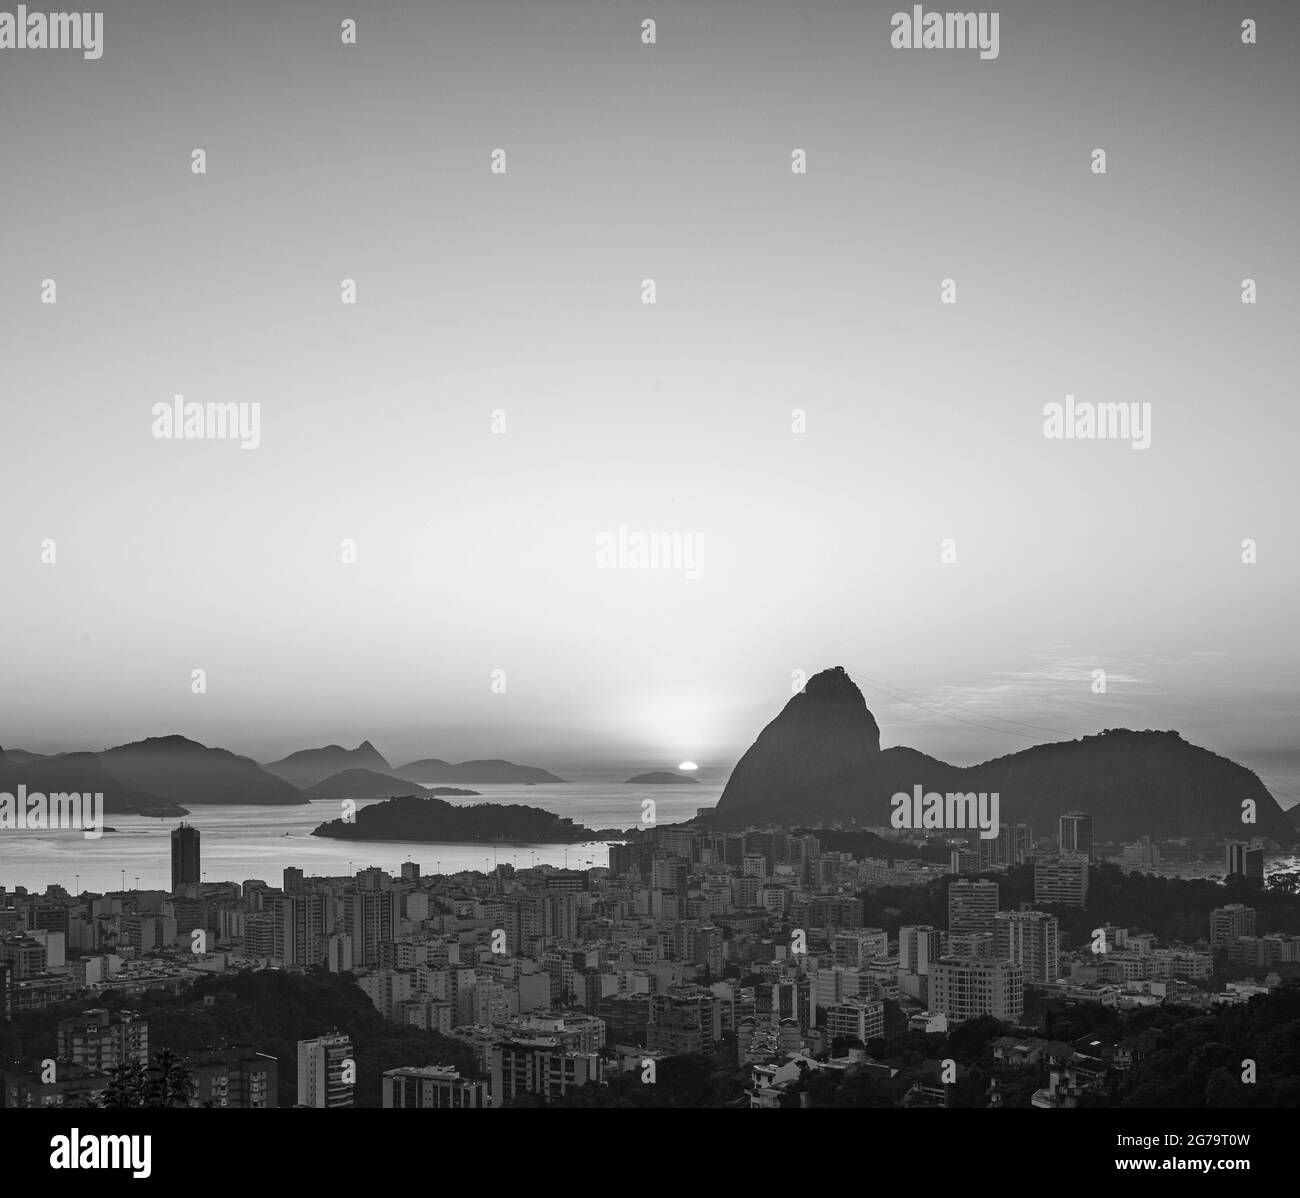 Early morning shot during Sunrise of Sugarloaf Mountain and Botafogo in Rio de Janeiro, Brazil Stock Photo